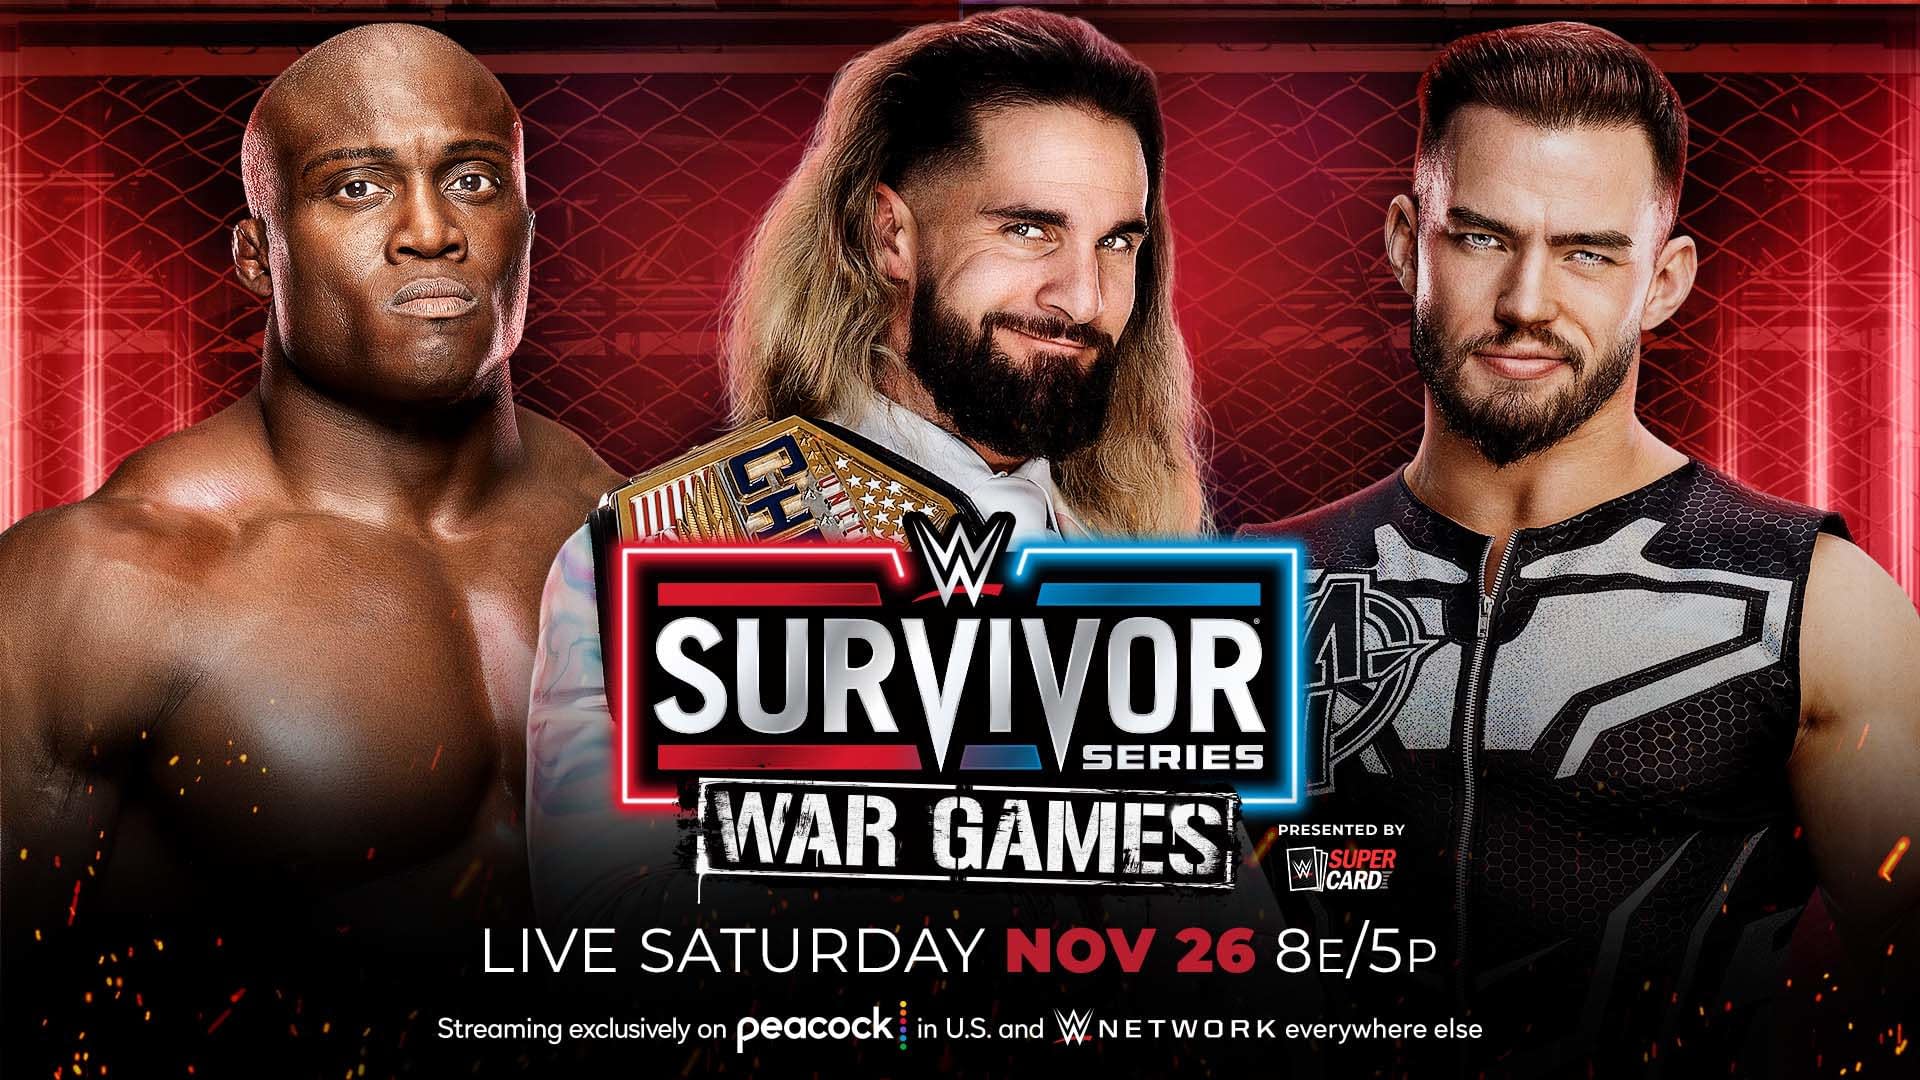 WWE Survivor Series War Games Full Card, How to Watch, Live Results